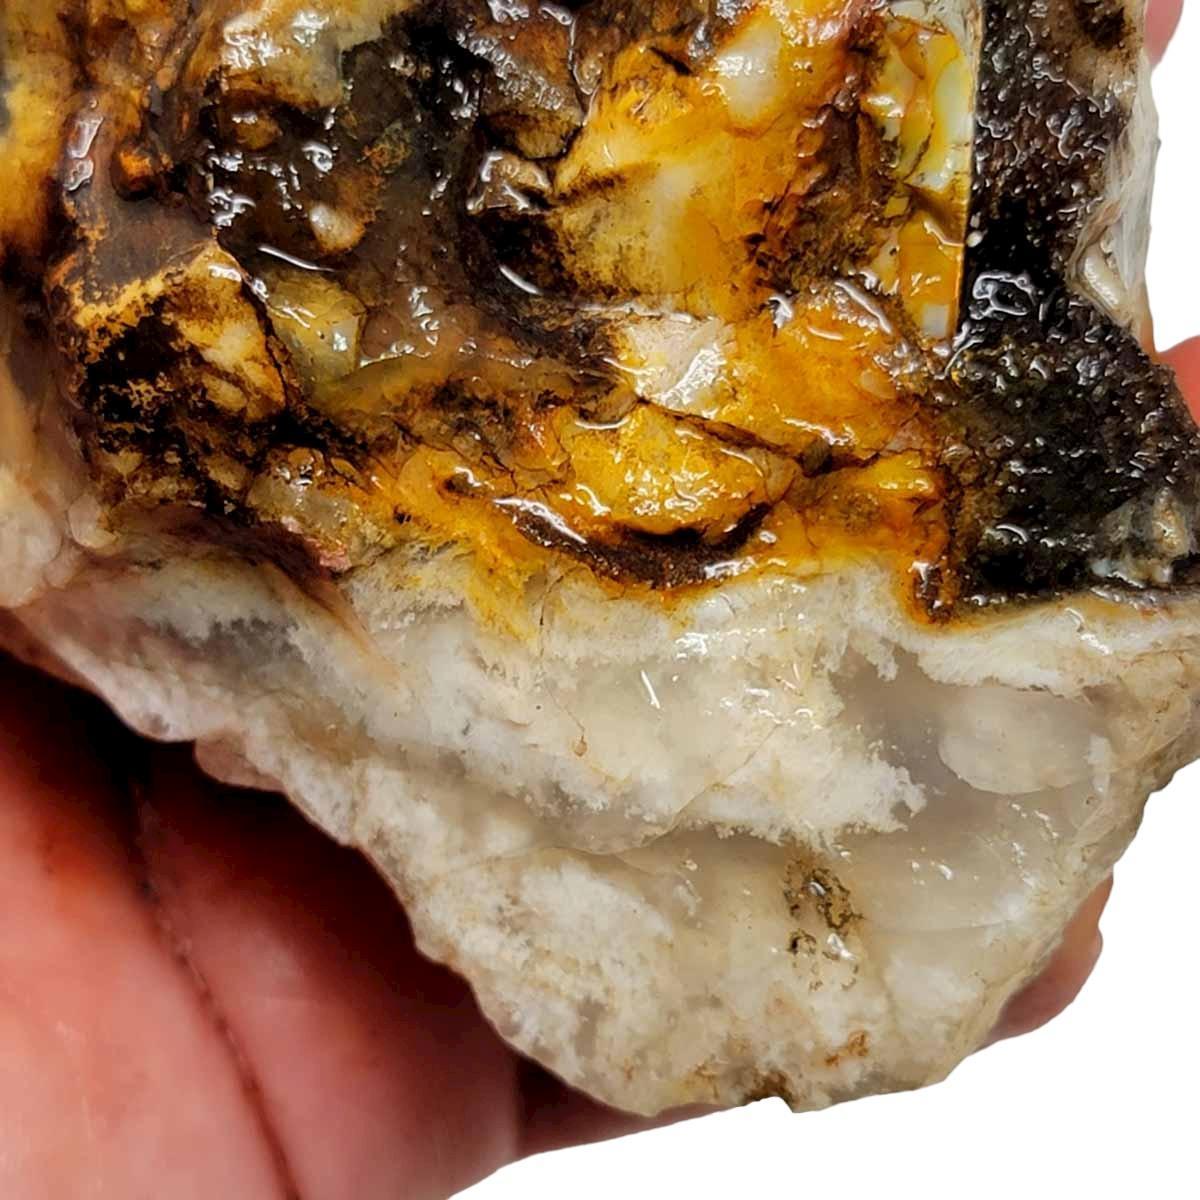 Stinking Water Plume Agate Rough Chunk! - LapidaryCentral